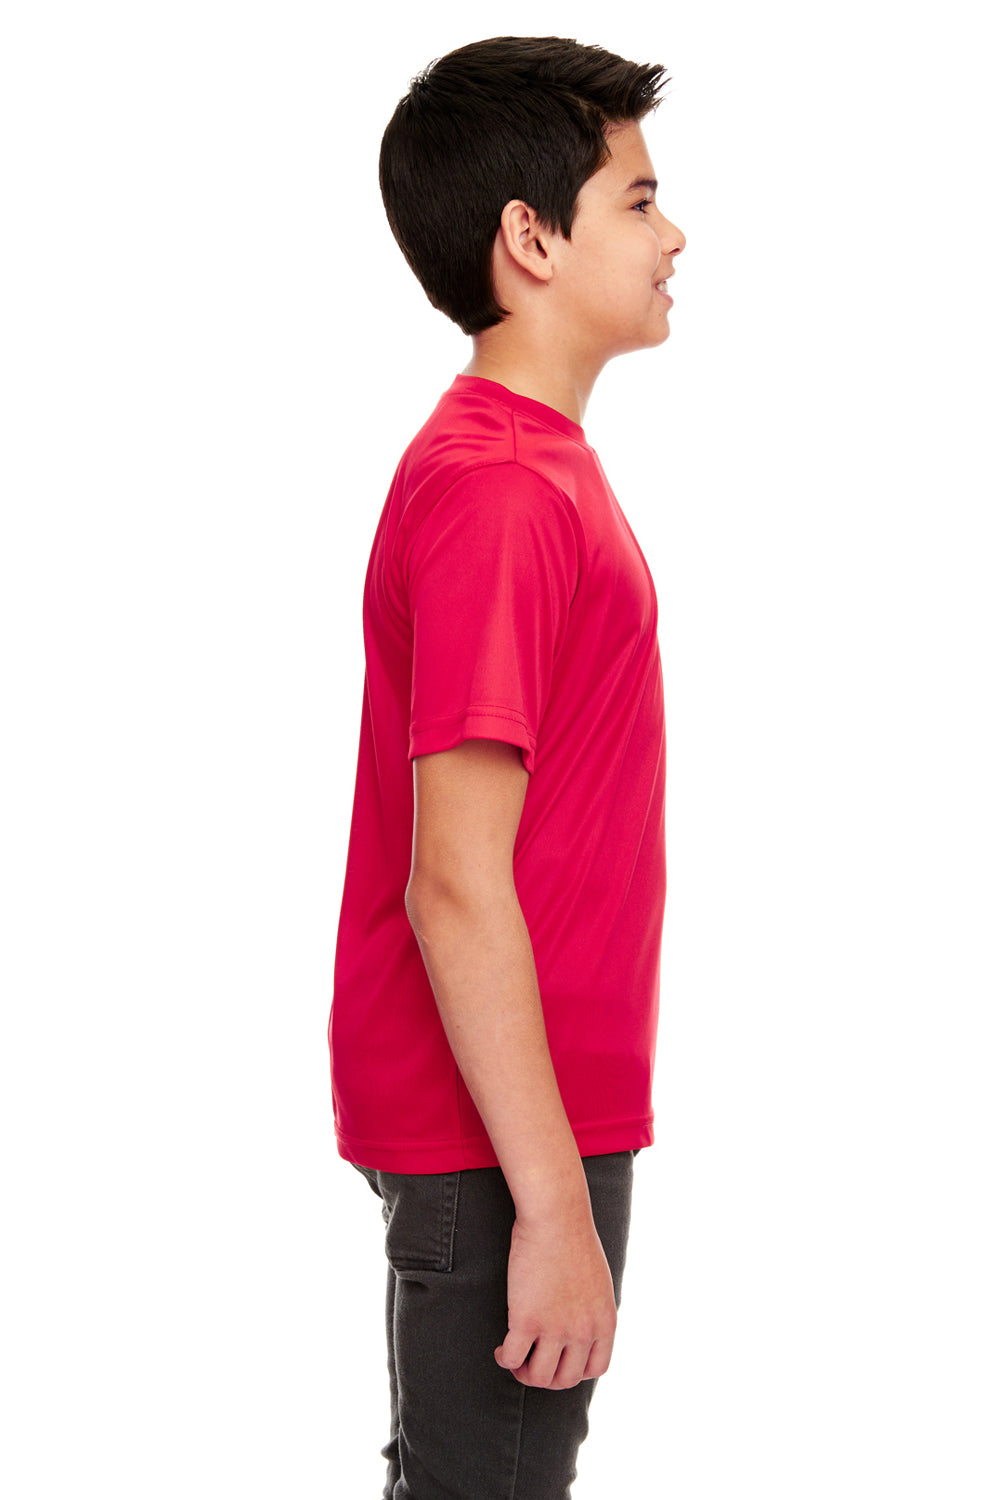 UltraClub 8420Y Youth Cool & Dry Performance Moisture Wicking Short Sleeve Crewneck T-Shirt Red Side